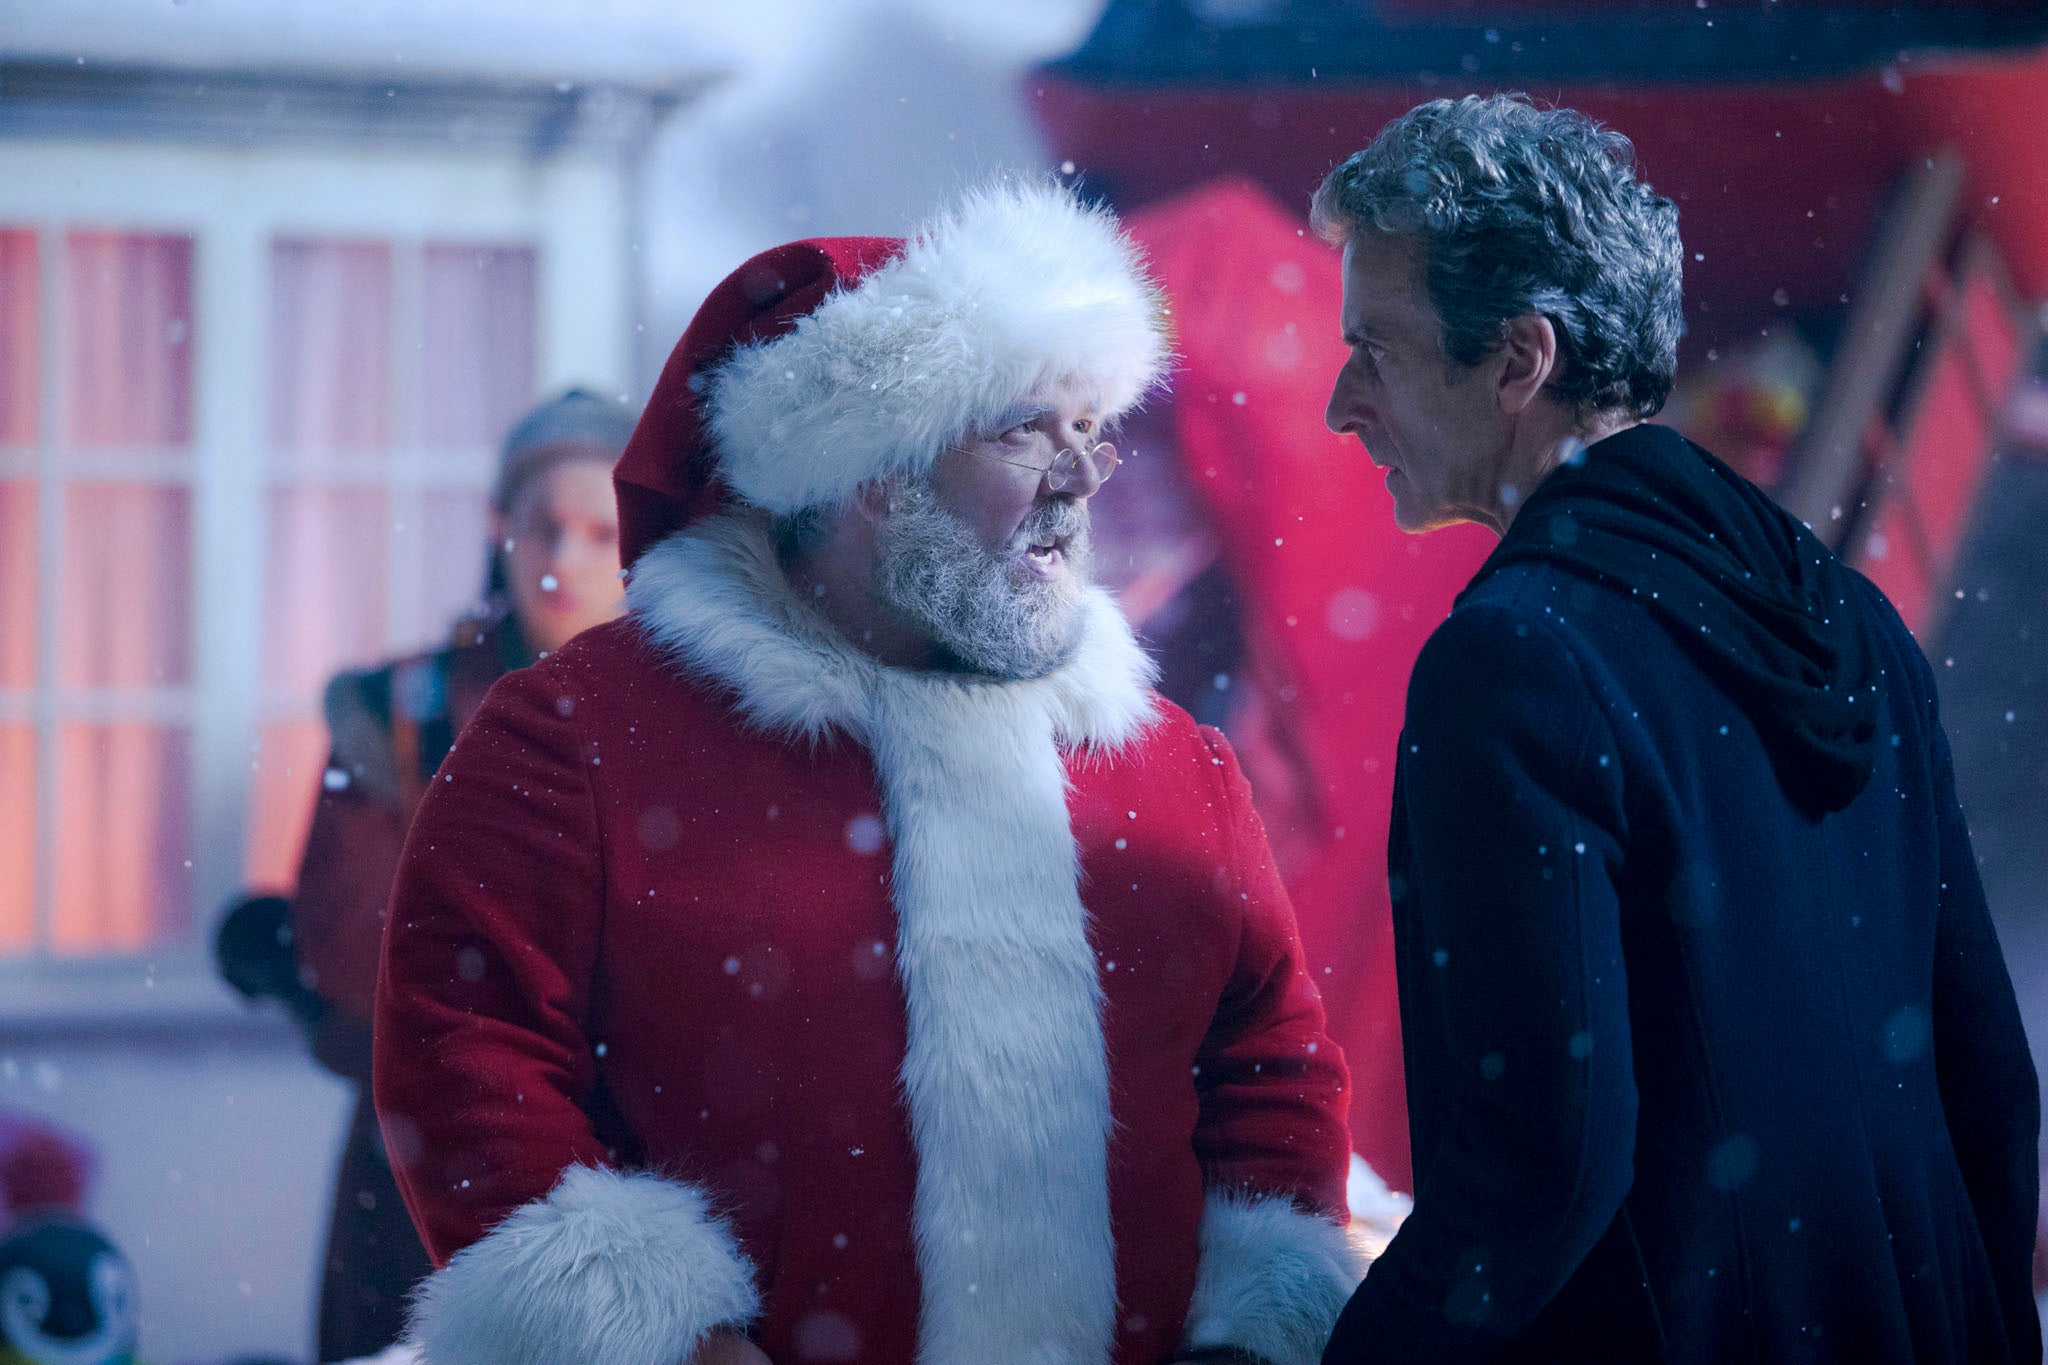 Nick Frost plays Santa Claus in the Doctor Who Christmas special